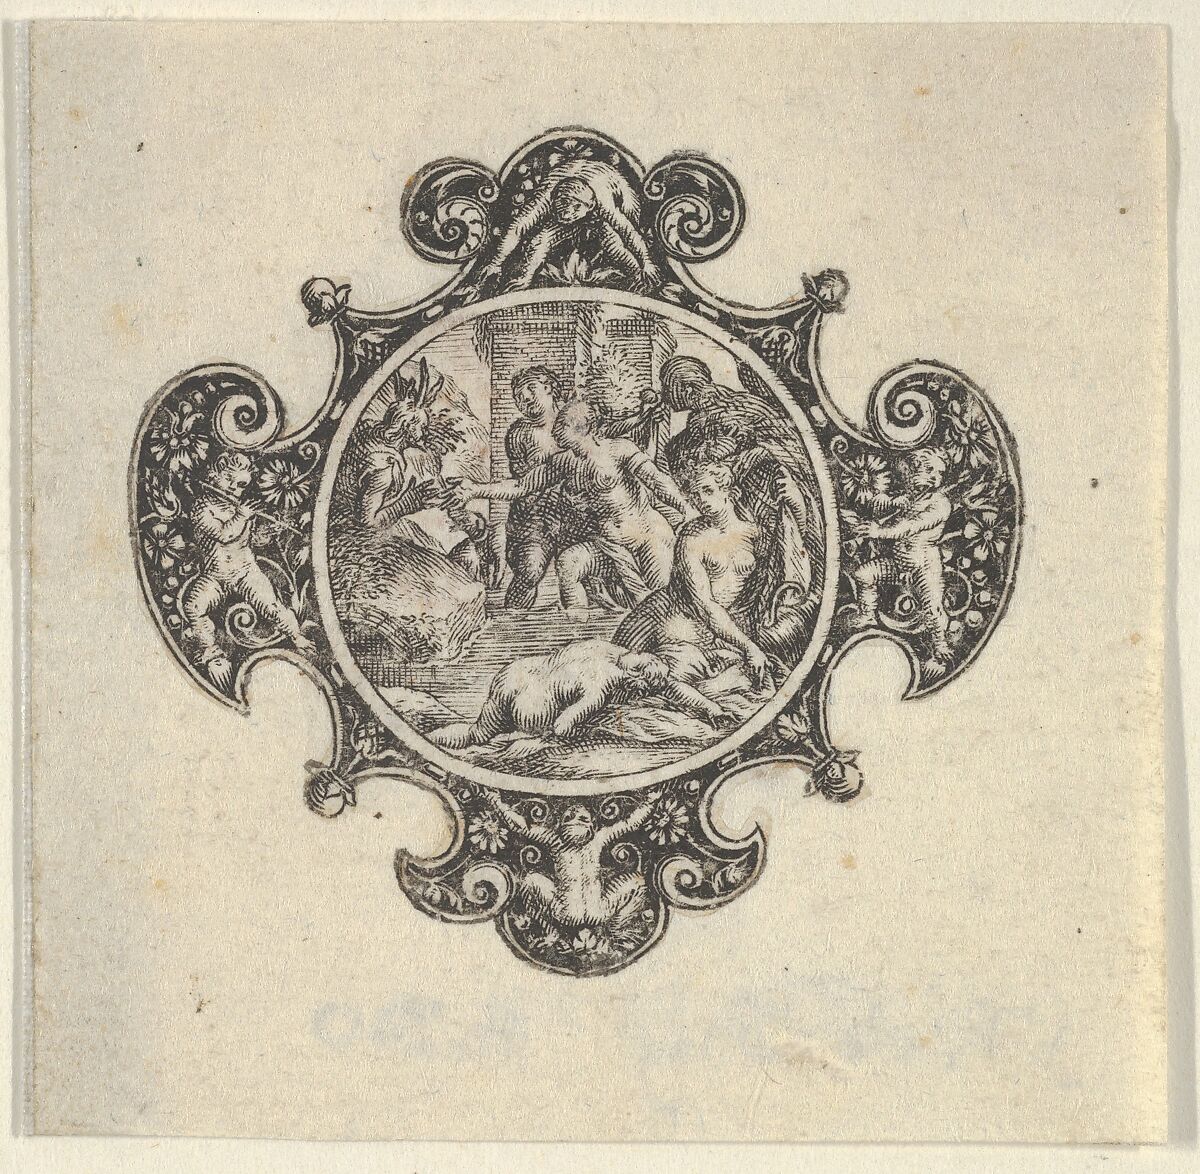 Copy of the Center of a Design for a Brooch, after Johann Theodor de Bry (Netherlandish, Strasbourg 1561–1623 Bad Schwalbach), Engraving and blackwork 